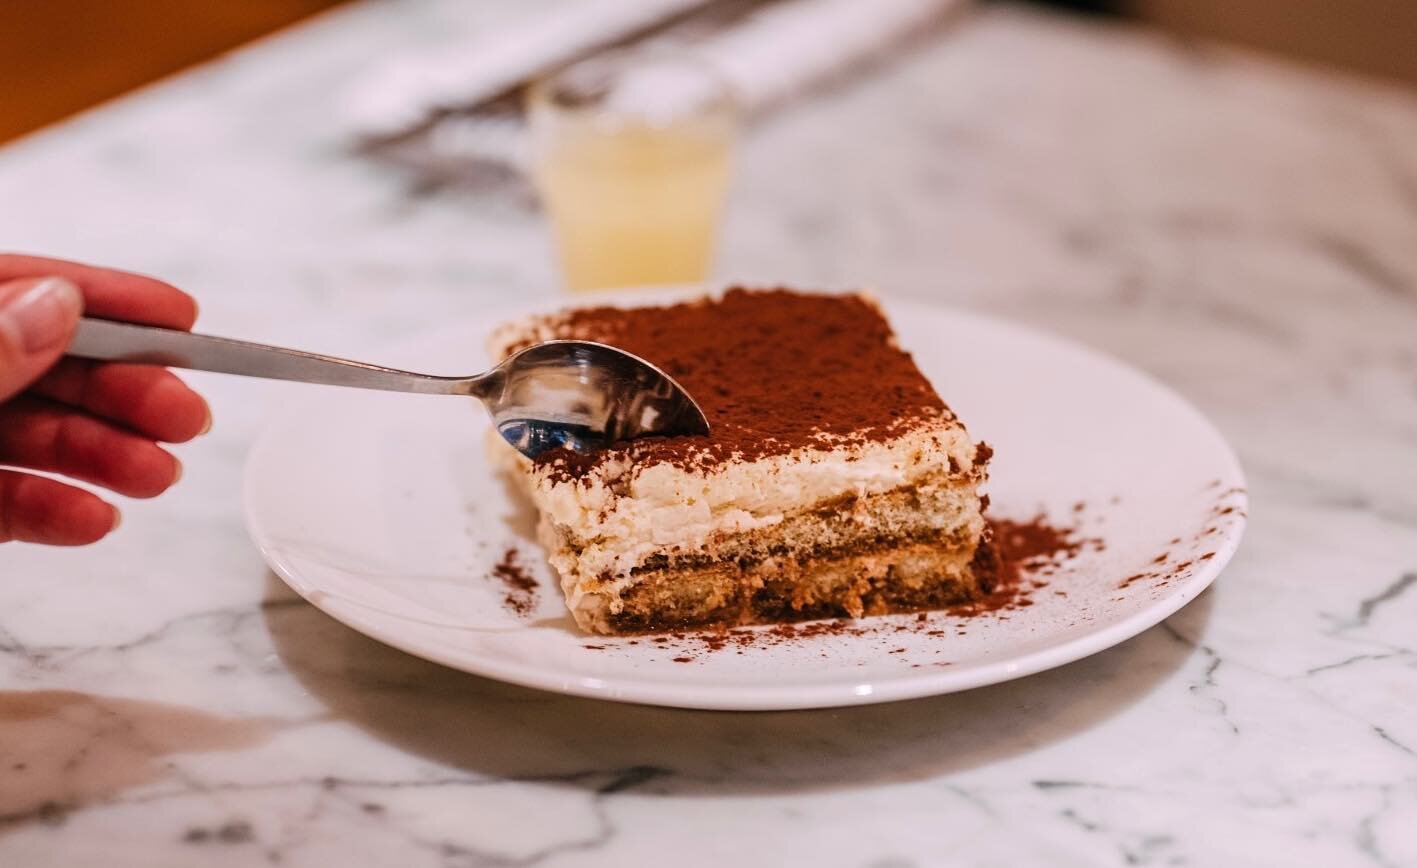 Our all time favorite... TIRAMISU!!!
Is it dinnertime yet? 🤤✨